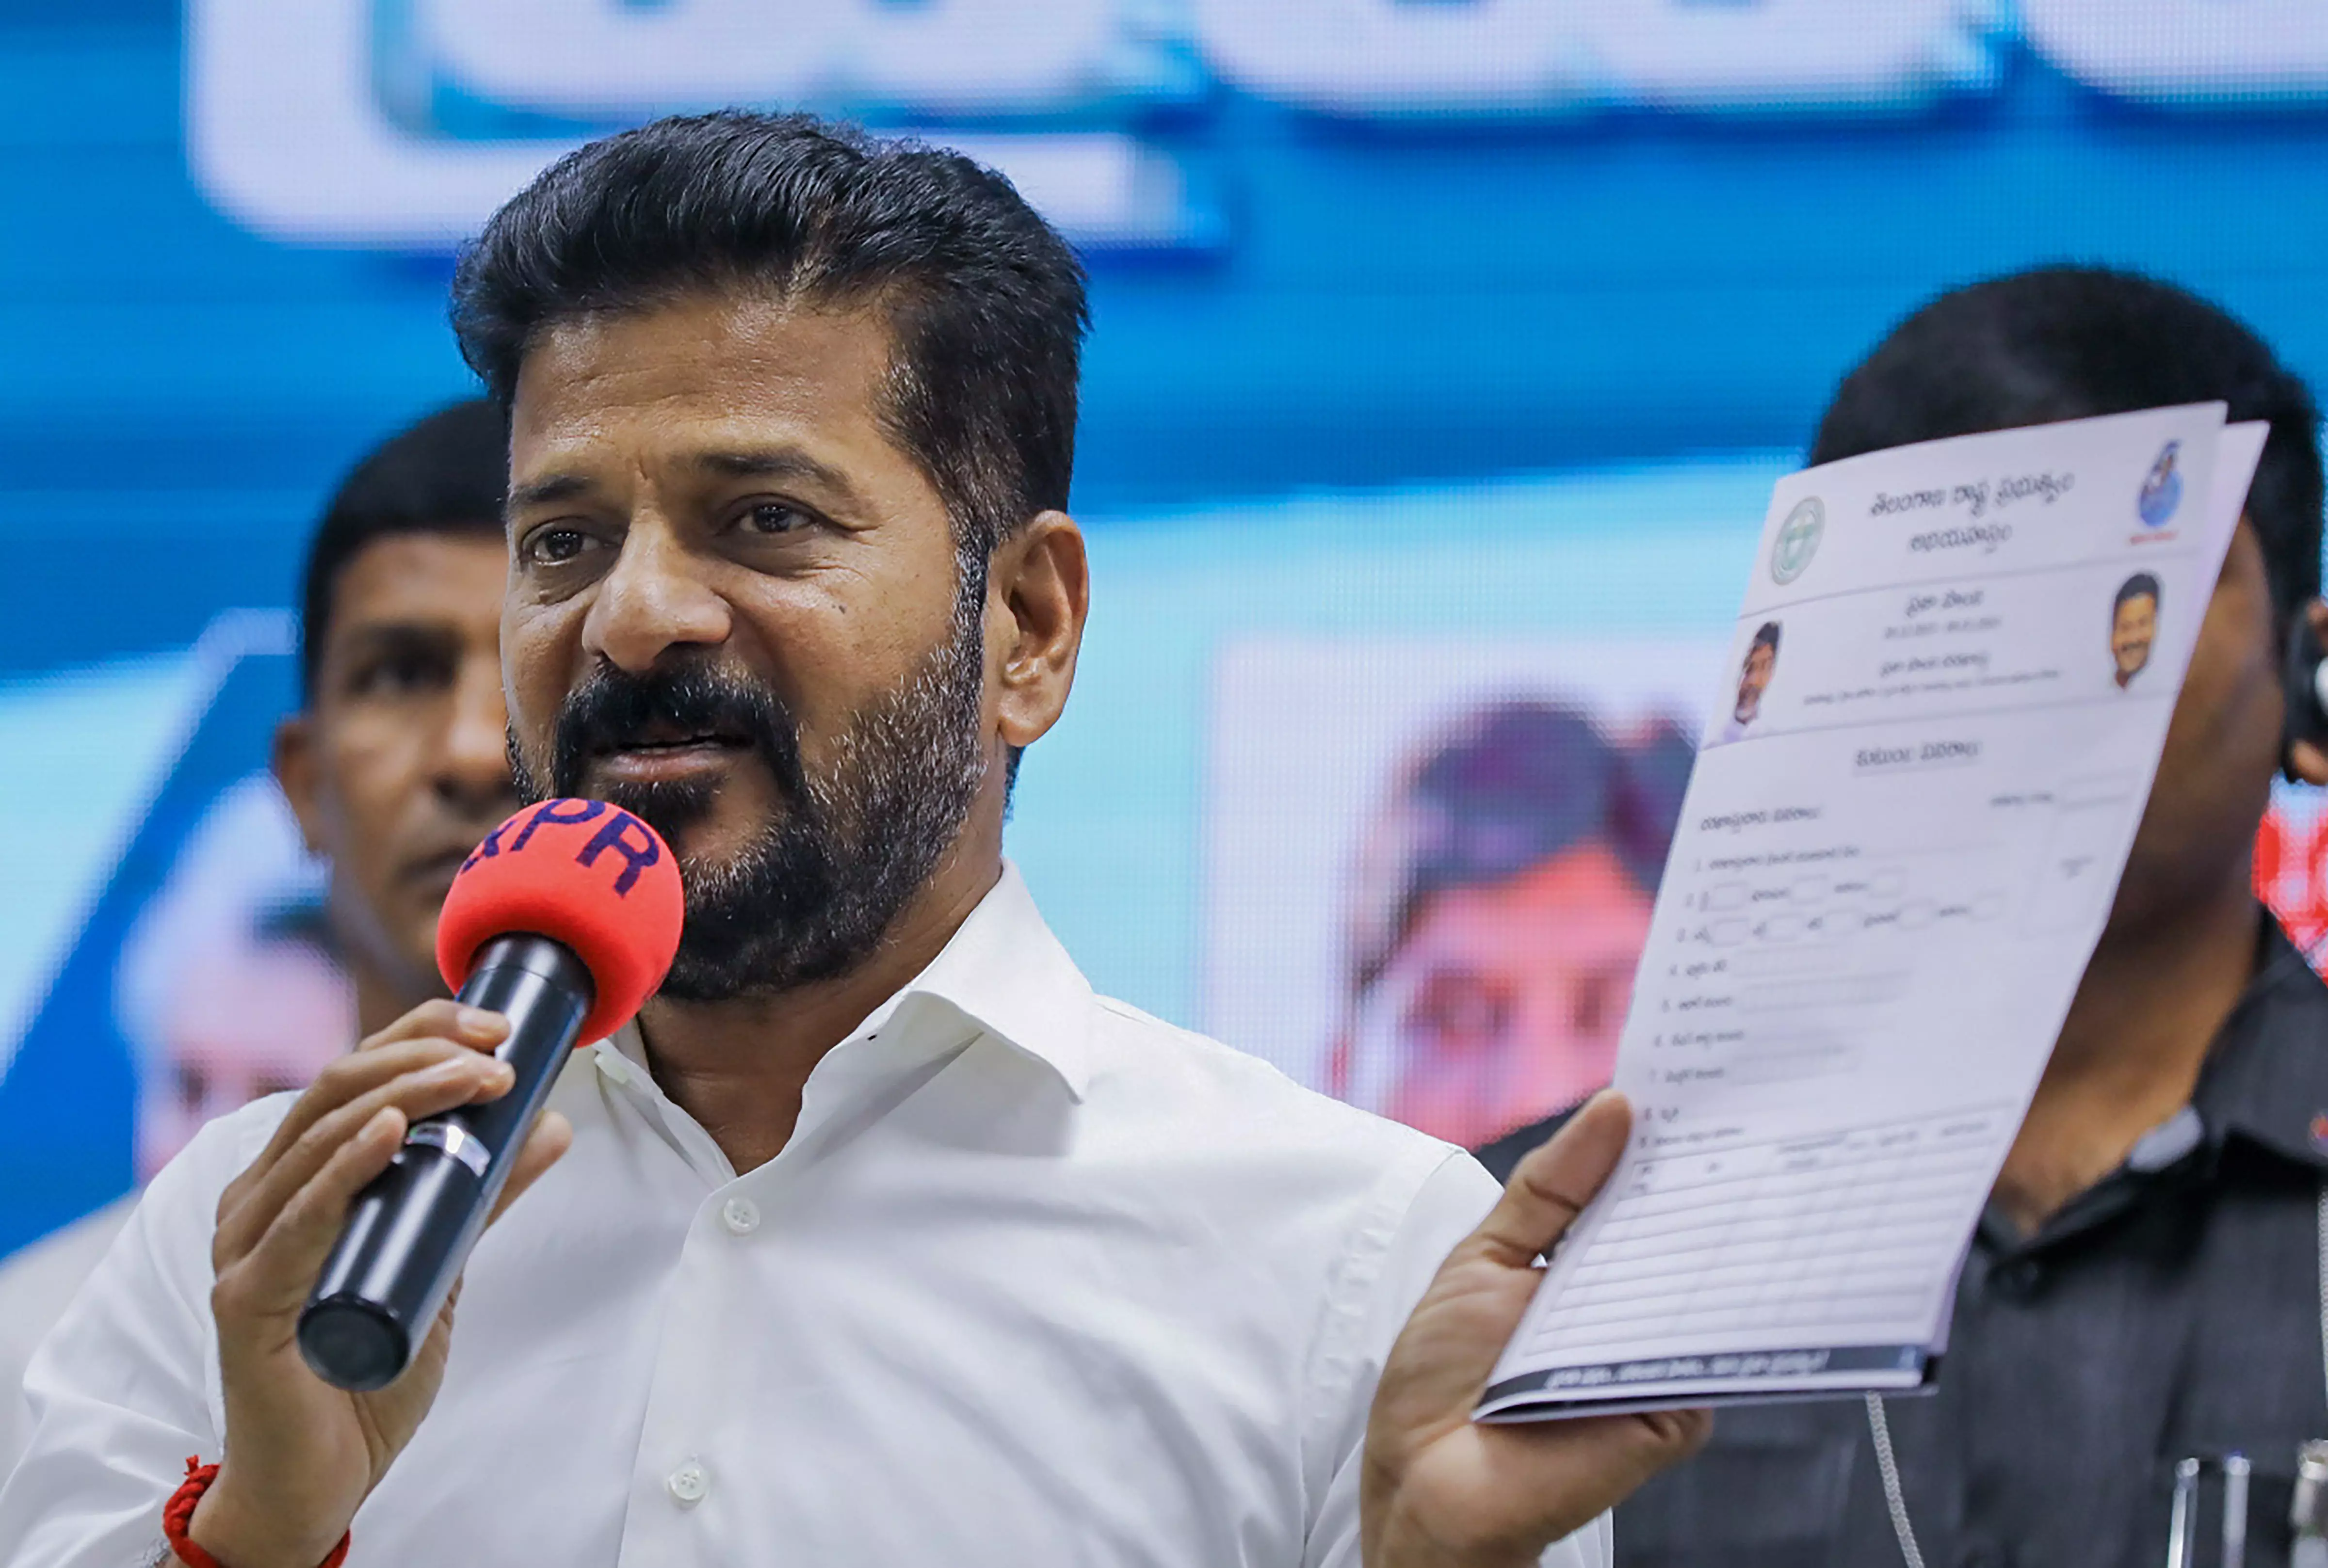 Previous KCR govt bought 22 Toyota Land Cruisers: Revanth Reddy